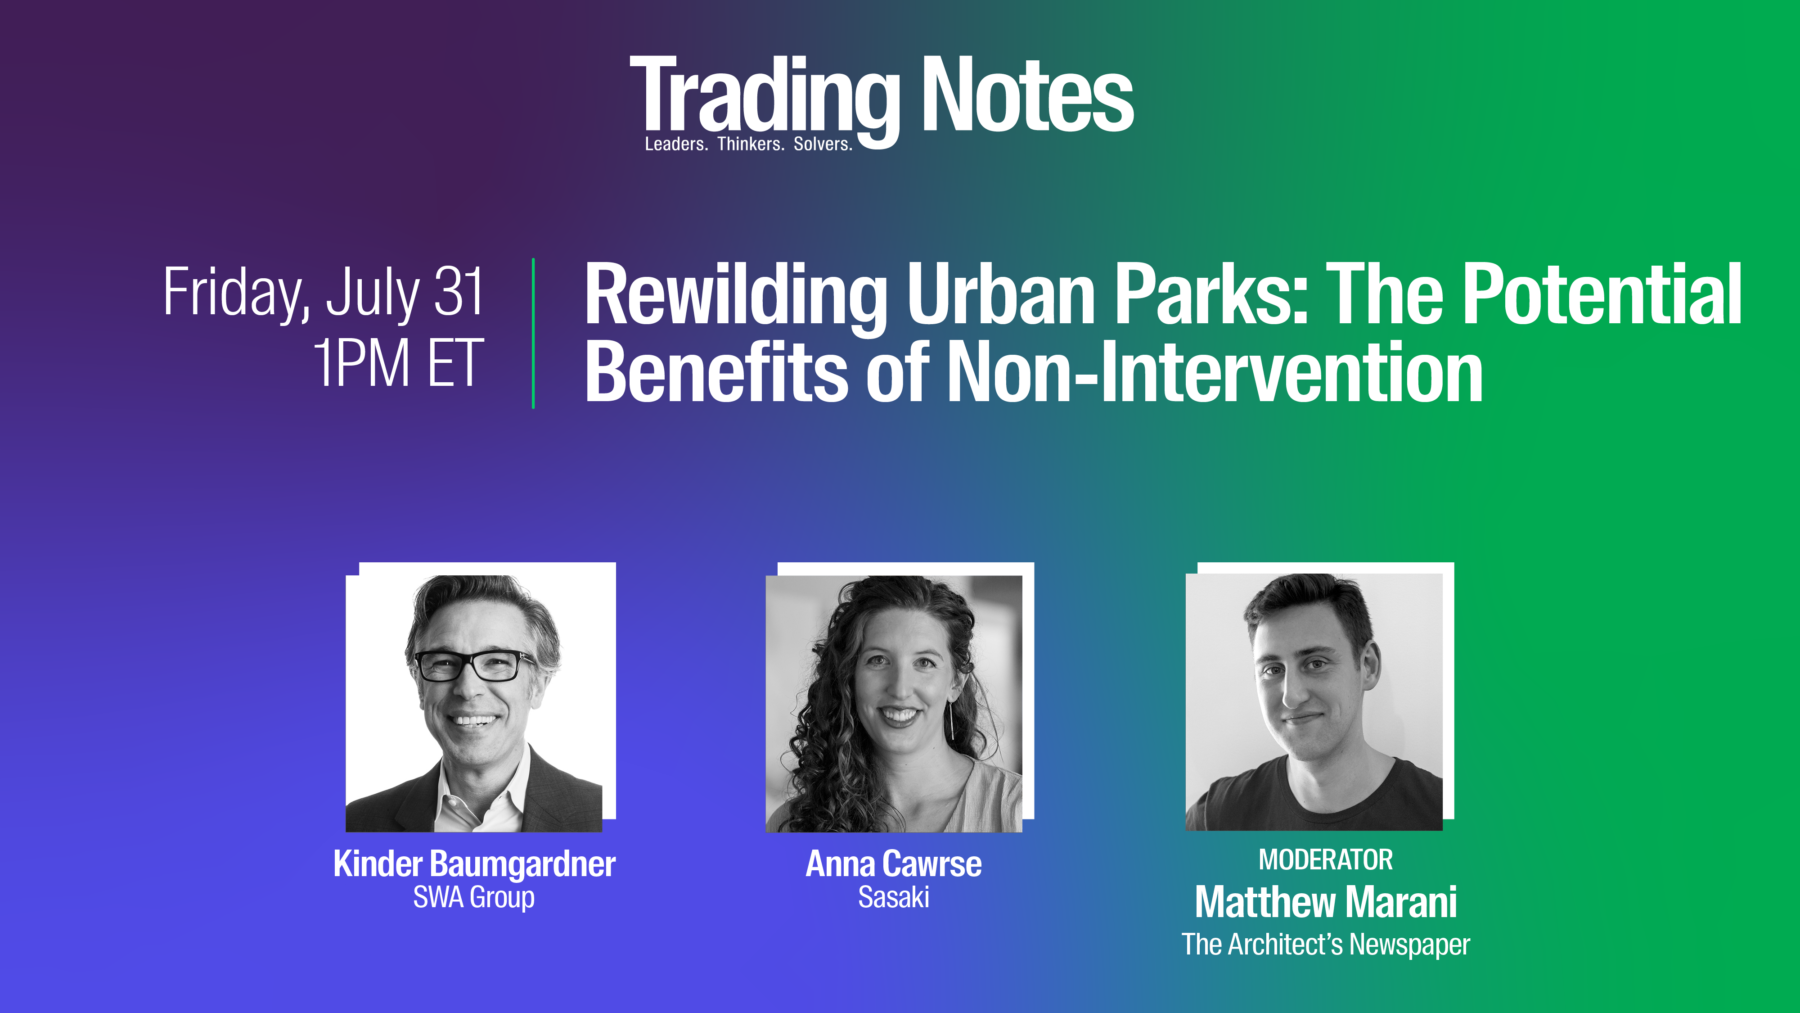 Post that reads: Trading Notes: Rewilding Urban Parks, The Benefits of Non-Intervention